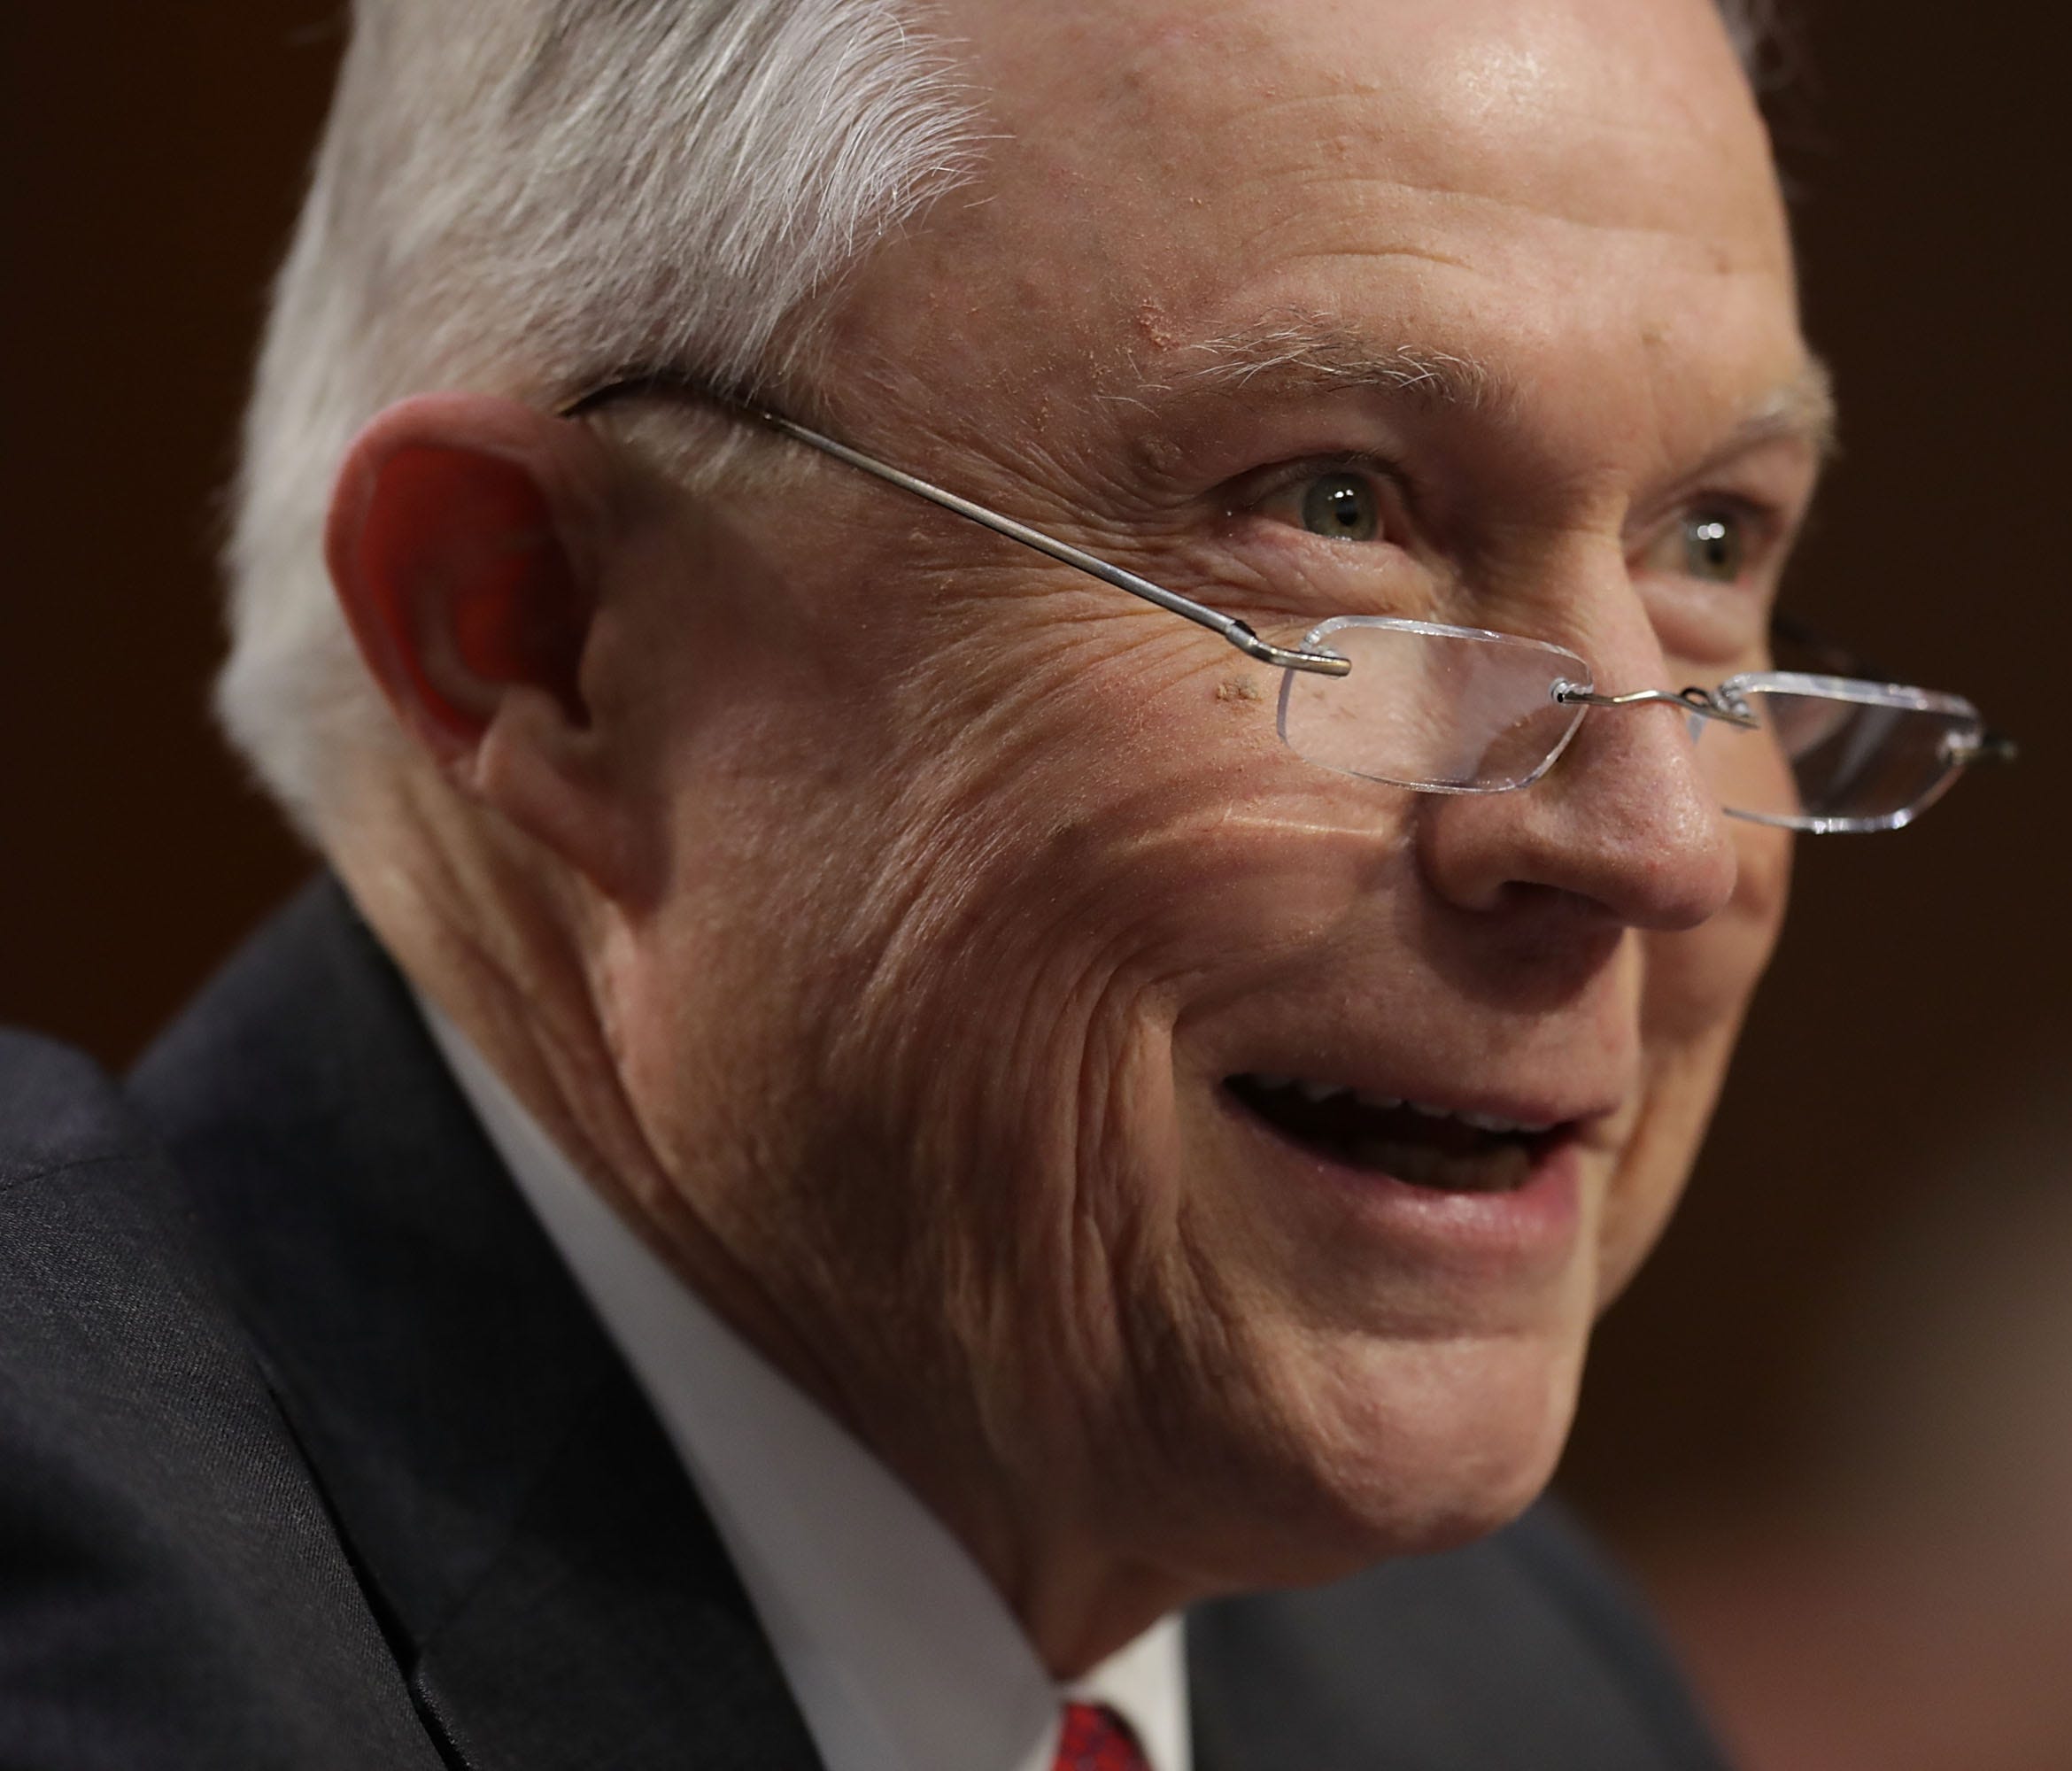 Attorney General Jeff Sessions testifies before the Senate Intelligence Committee about Russian interference in the 2016 presidential election in the Hart Senate Office Building on Capitol Hill June 13, 2017 in Washington, D.C.